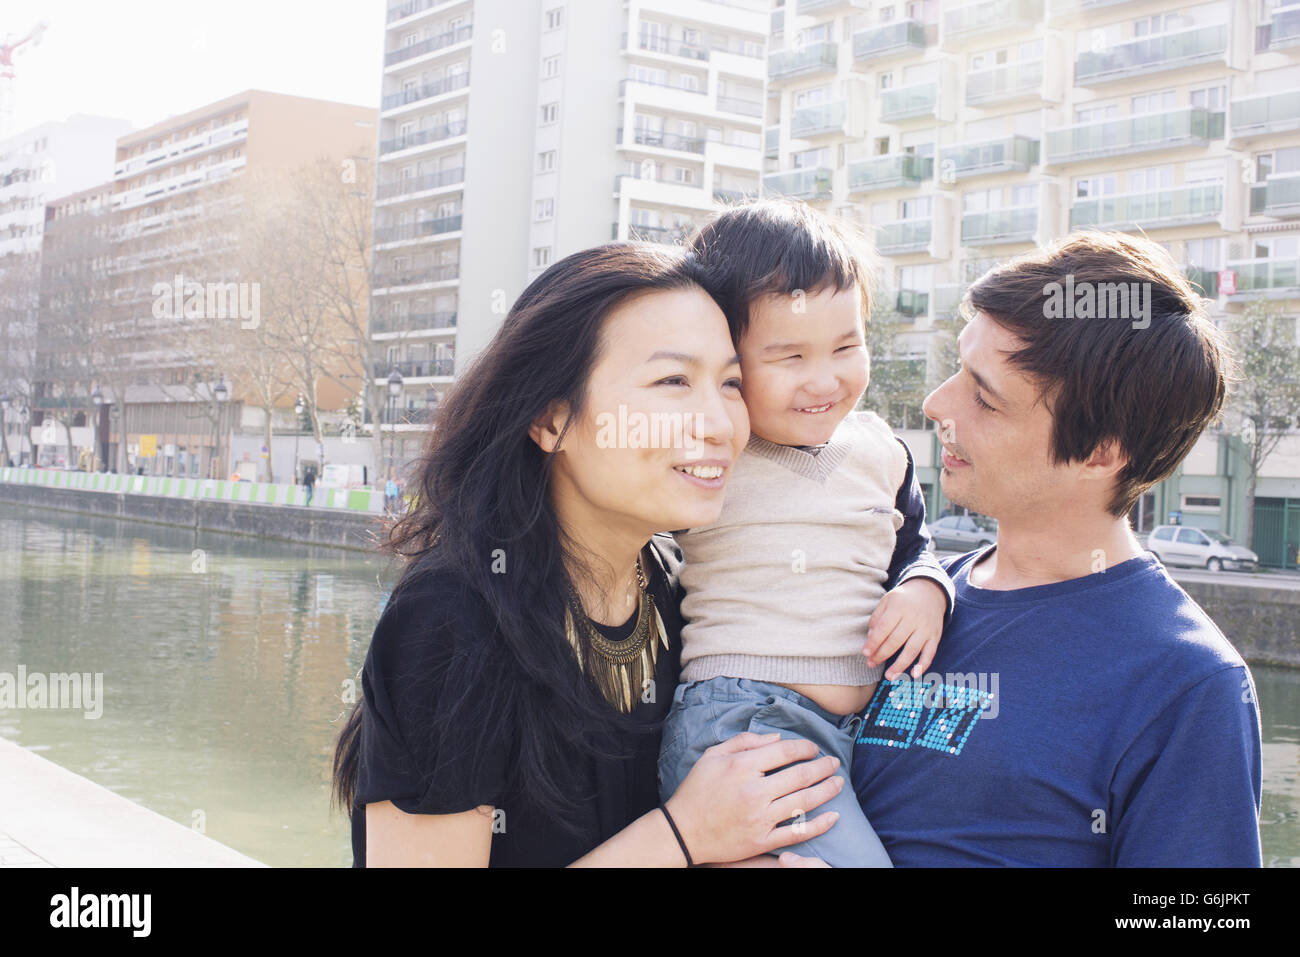 Parents and little boy in city Stock Photo